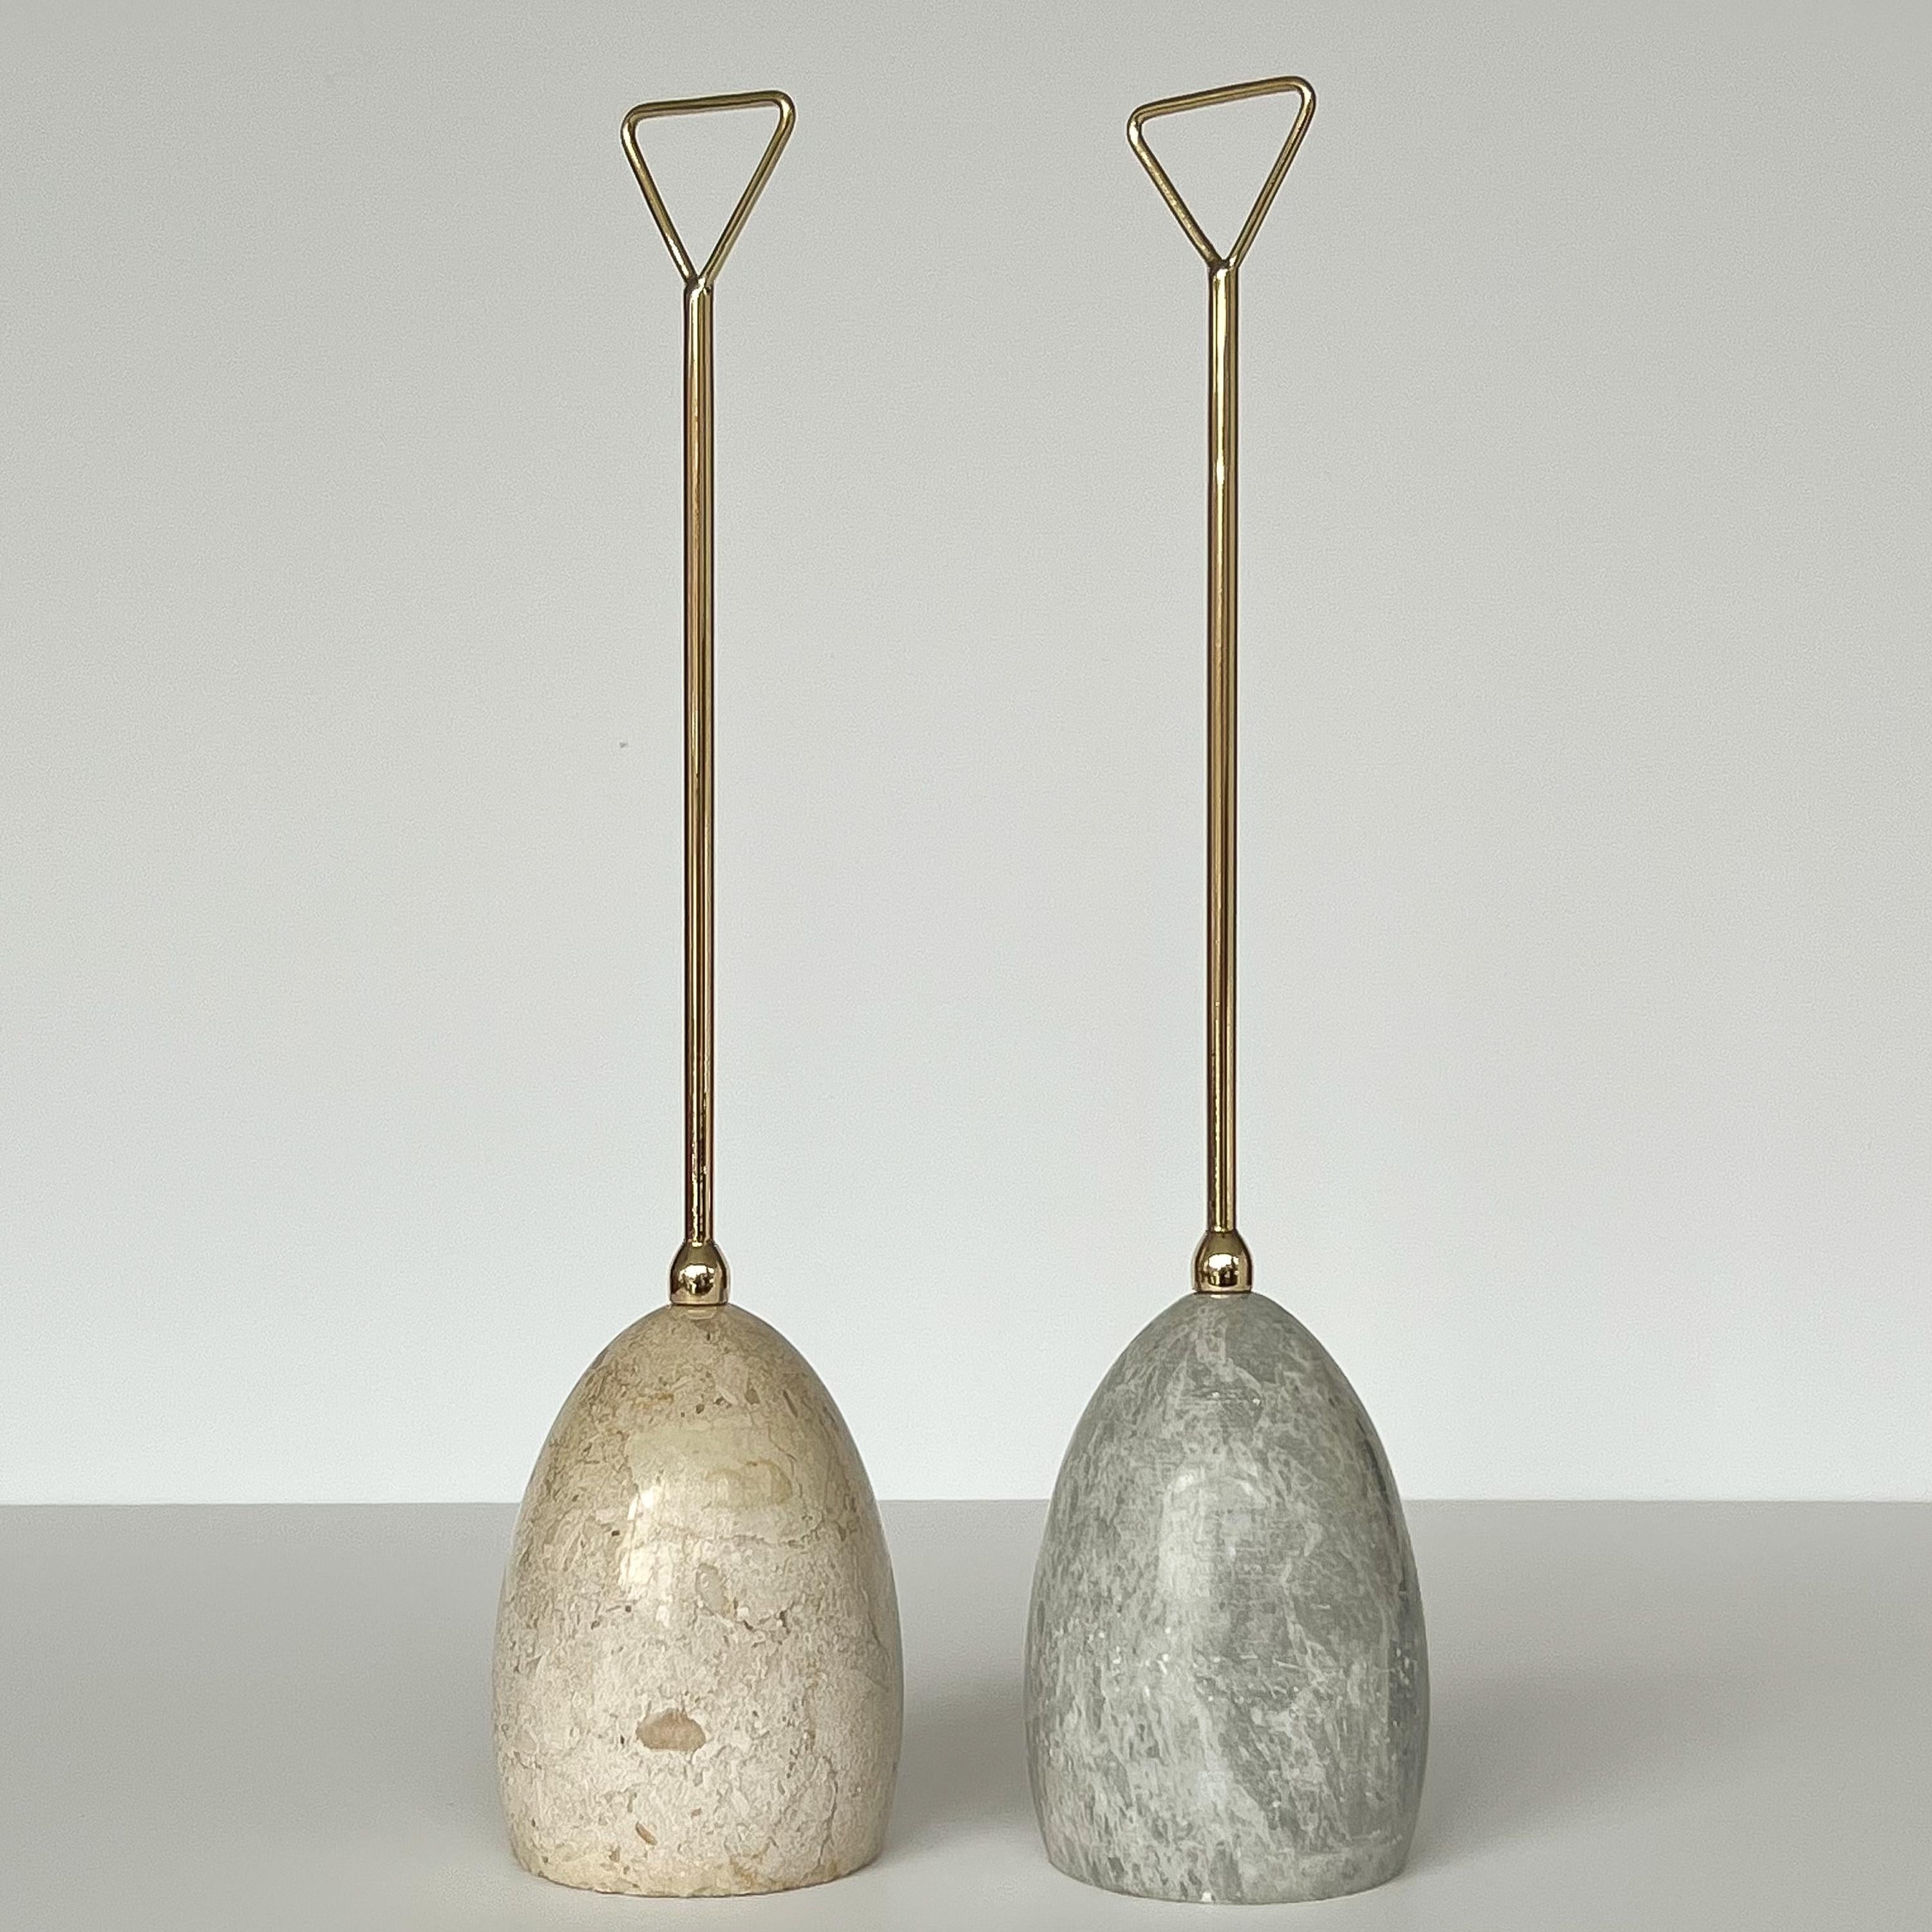 Luigi Caccia Dominioni (1913-2016) marble and brass handled doorstops for Azucena, Italy circa 1950s. Priced individually. Egg shaped marble weighted bases with polished solid brass handles. Bases measure 5.75